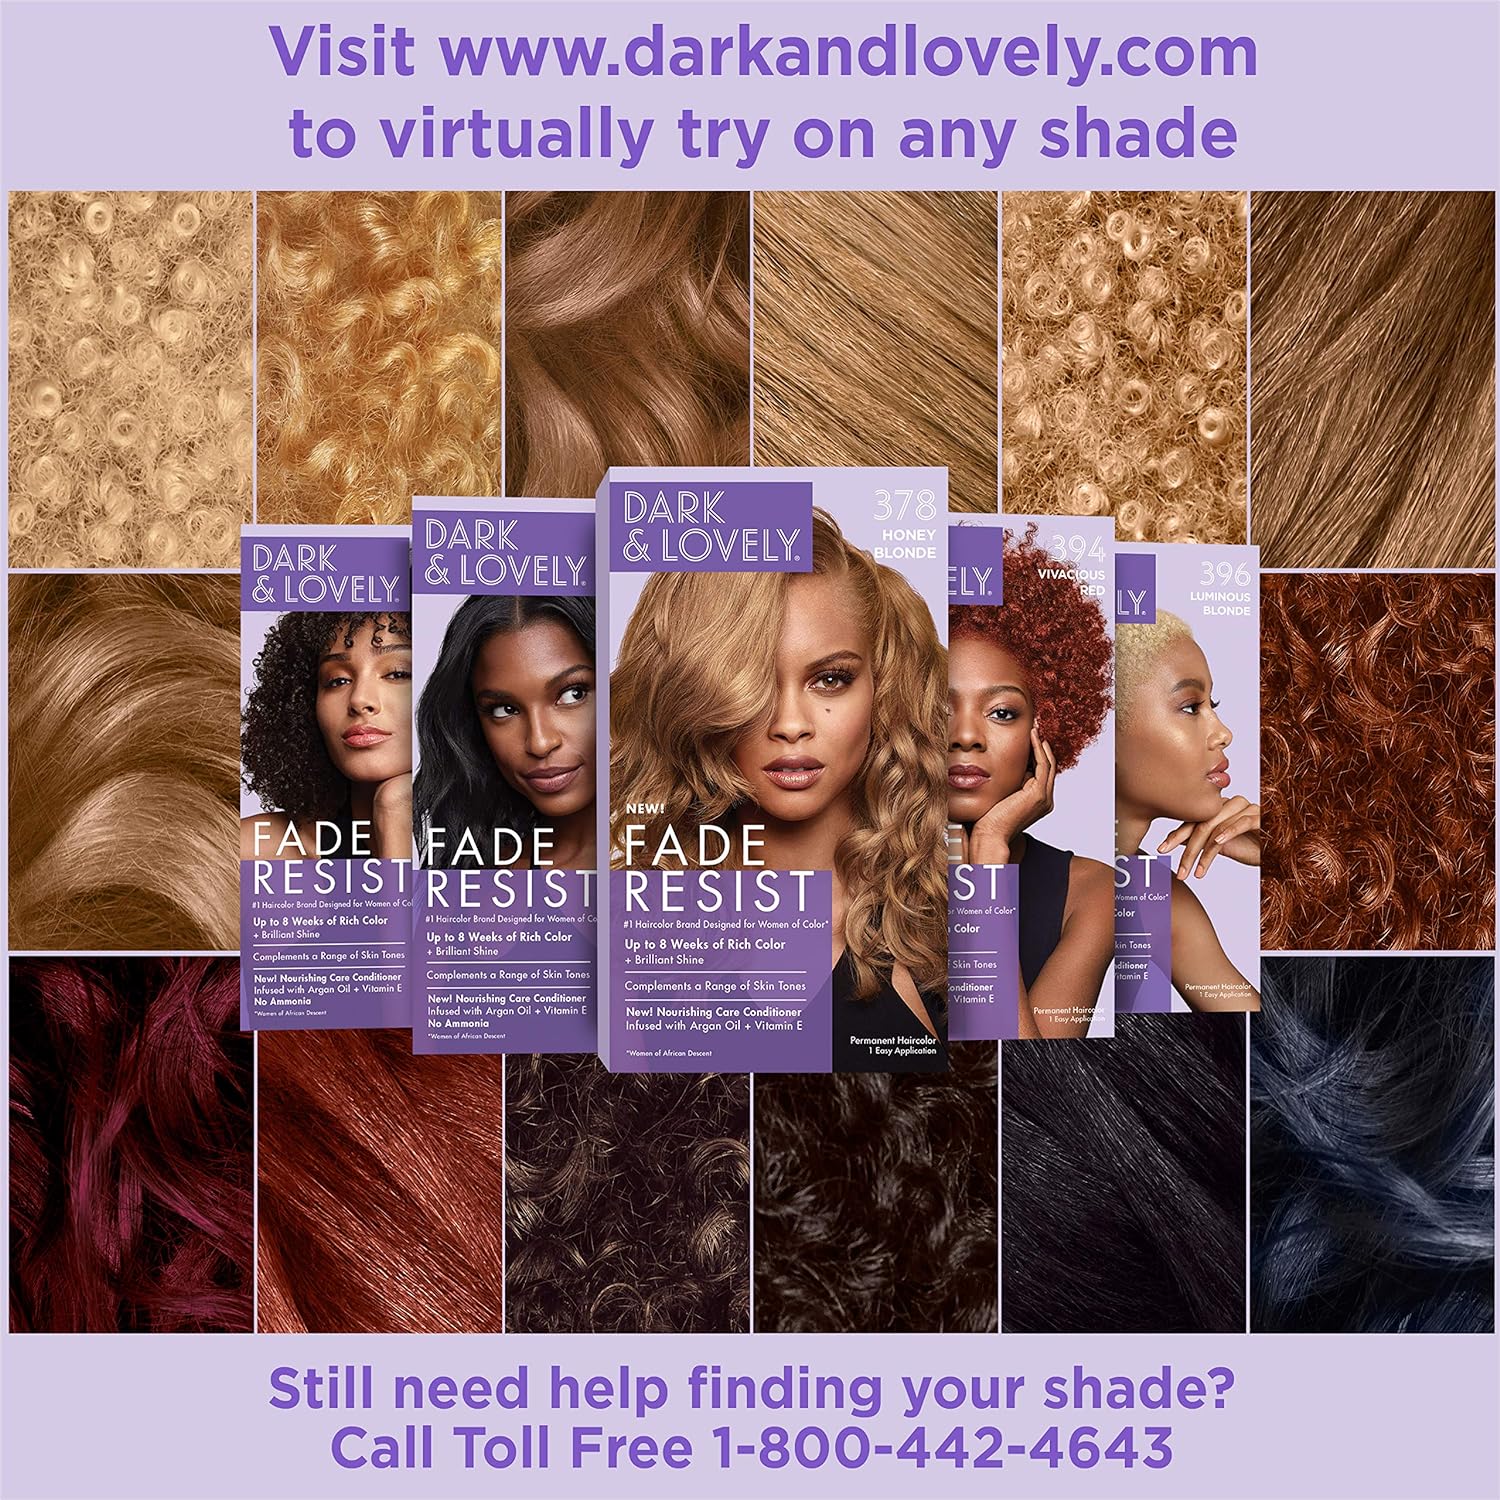 SoftSheen-Carson Dark and Lovely Fade Resist Rich Conditioning Hair Color, Permanent Hair Color, Up To 100 percent Gray Coverage, Brilliant Shine with Argan Oil and Vitamin E, Natural Black : Beauty & Personal Care